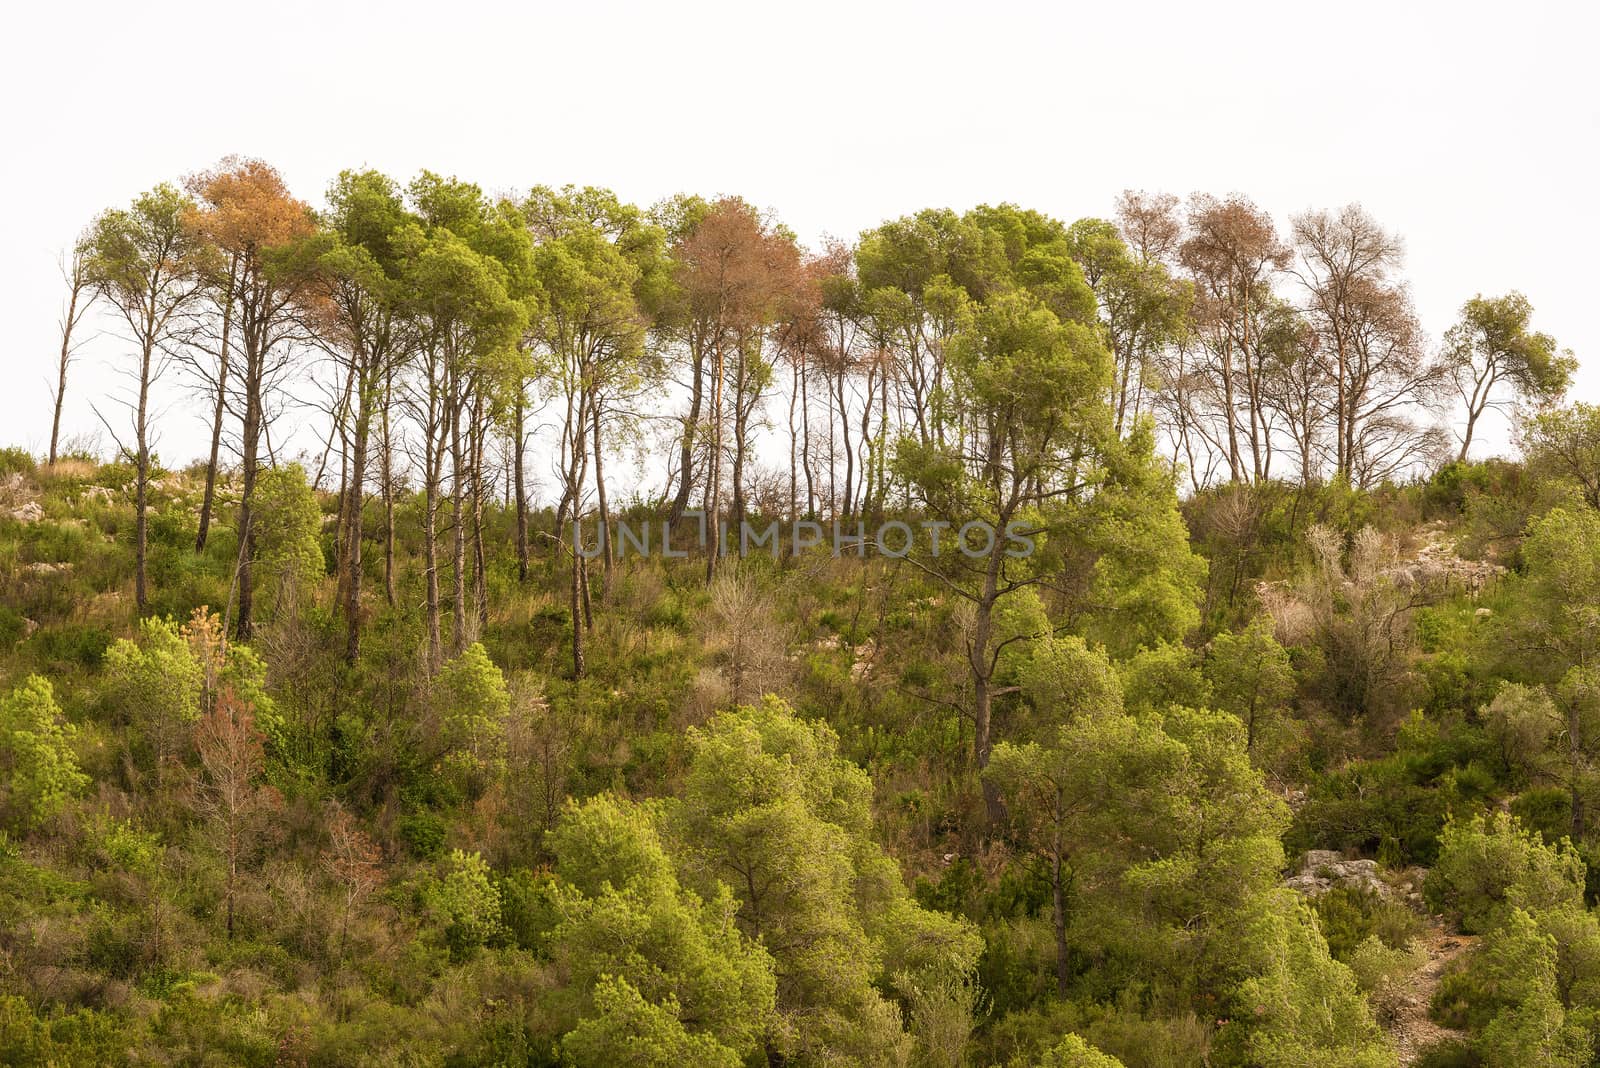 Landscape view at the hills in Catalonia near Barcelona by Marcus